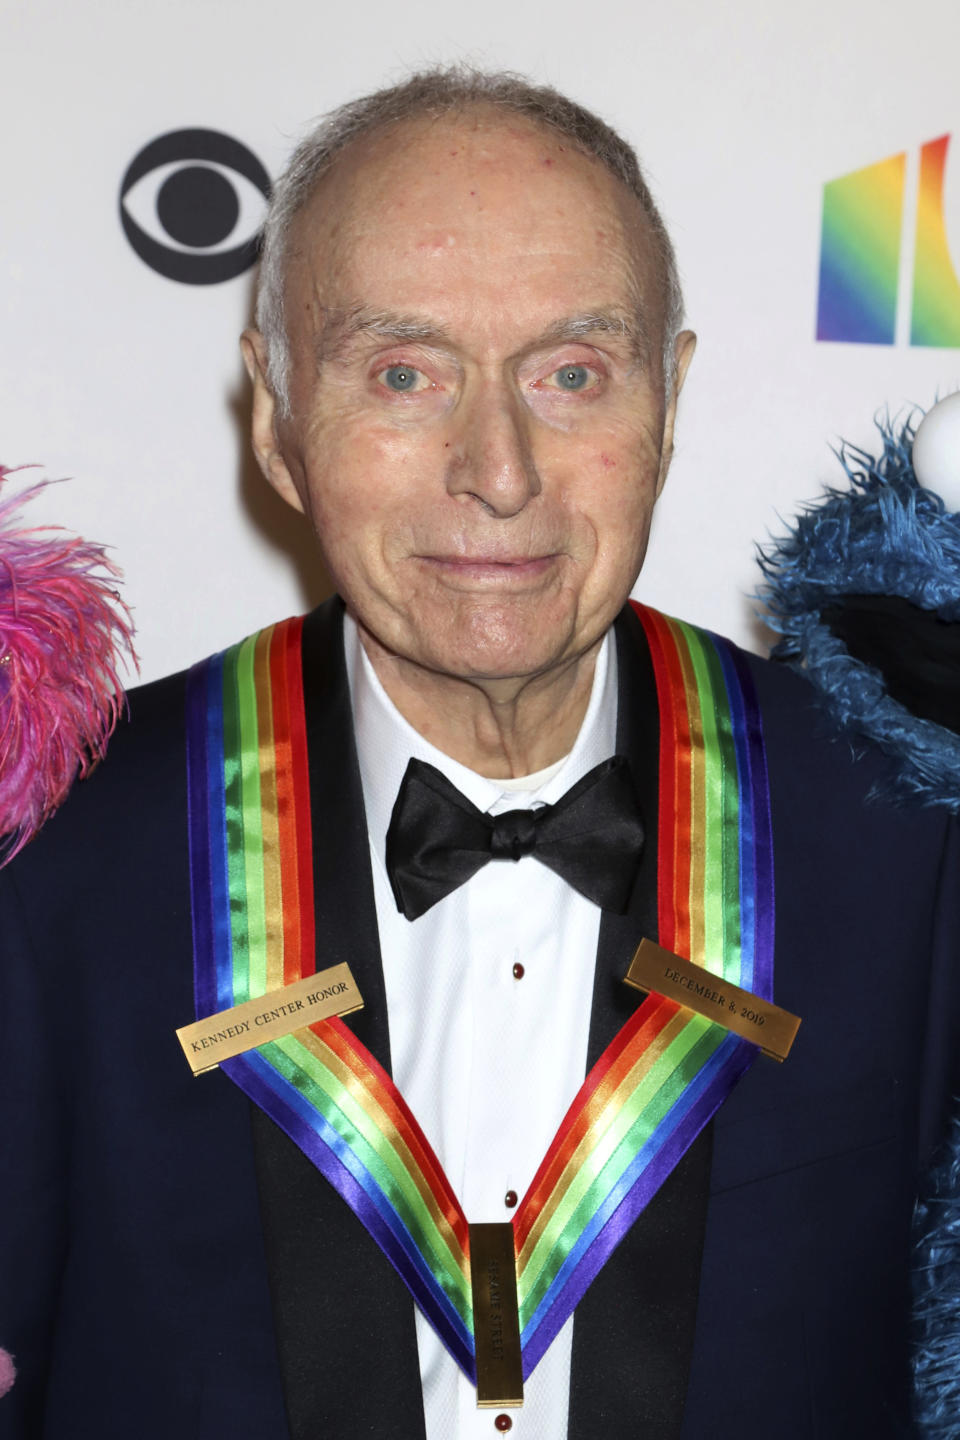 FILE - Honoree Lloyd Morrisett attends the 42nd Annual Kennedy Center Honors at The Kennedy Center, Sunday, Dec. 8, 2019, in Washington. Morrisett, the co-creator of the beloved children's education TV series “Sesame Street,” which uses empathy and fuzzy monsters like Abby Cadabby, Elmo and Cookie Monster to charm and teach generations around the world, has died. He was 93. Morrisett’s death was announced Tuesday by Sesame Workshop, the nonprofit he helped establish under the name the Children’s Television Workshop. (Photo by Greg Allen/Invision/AP, File)